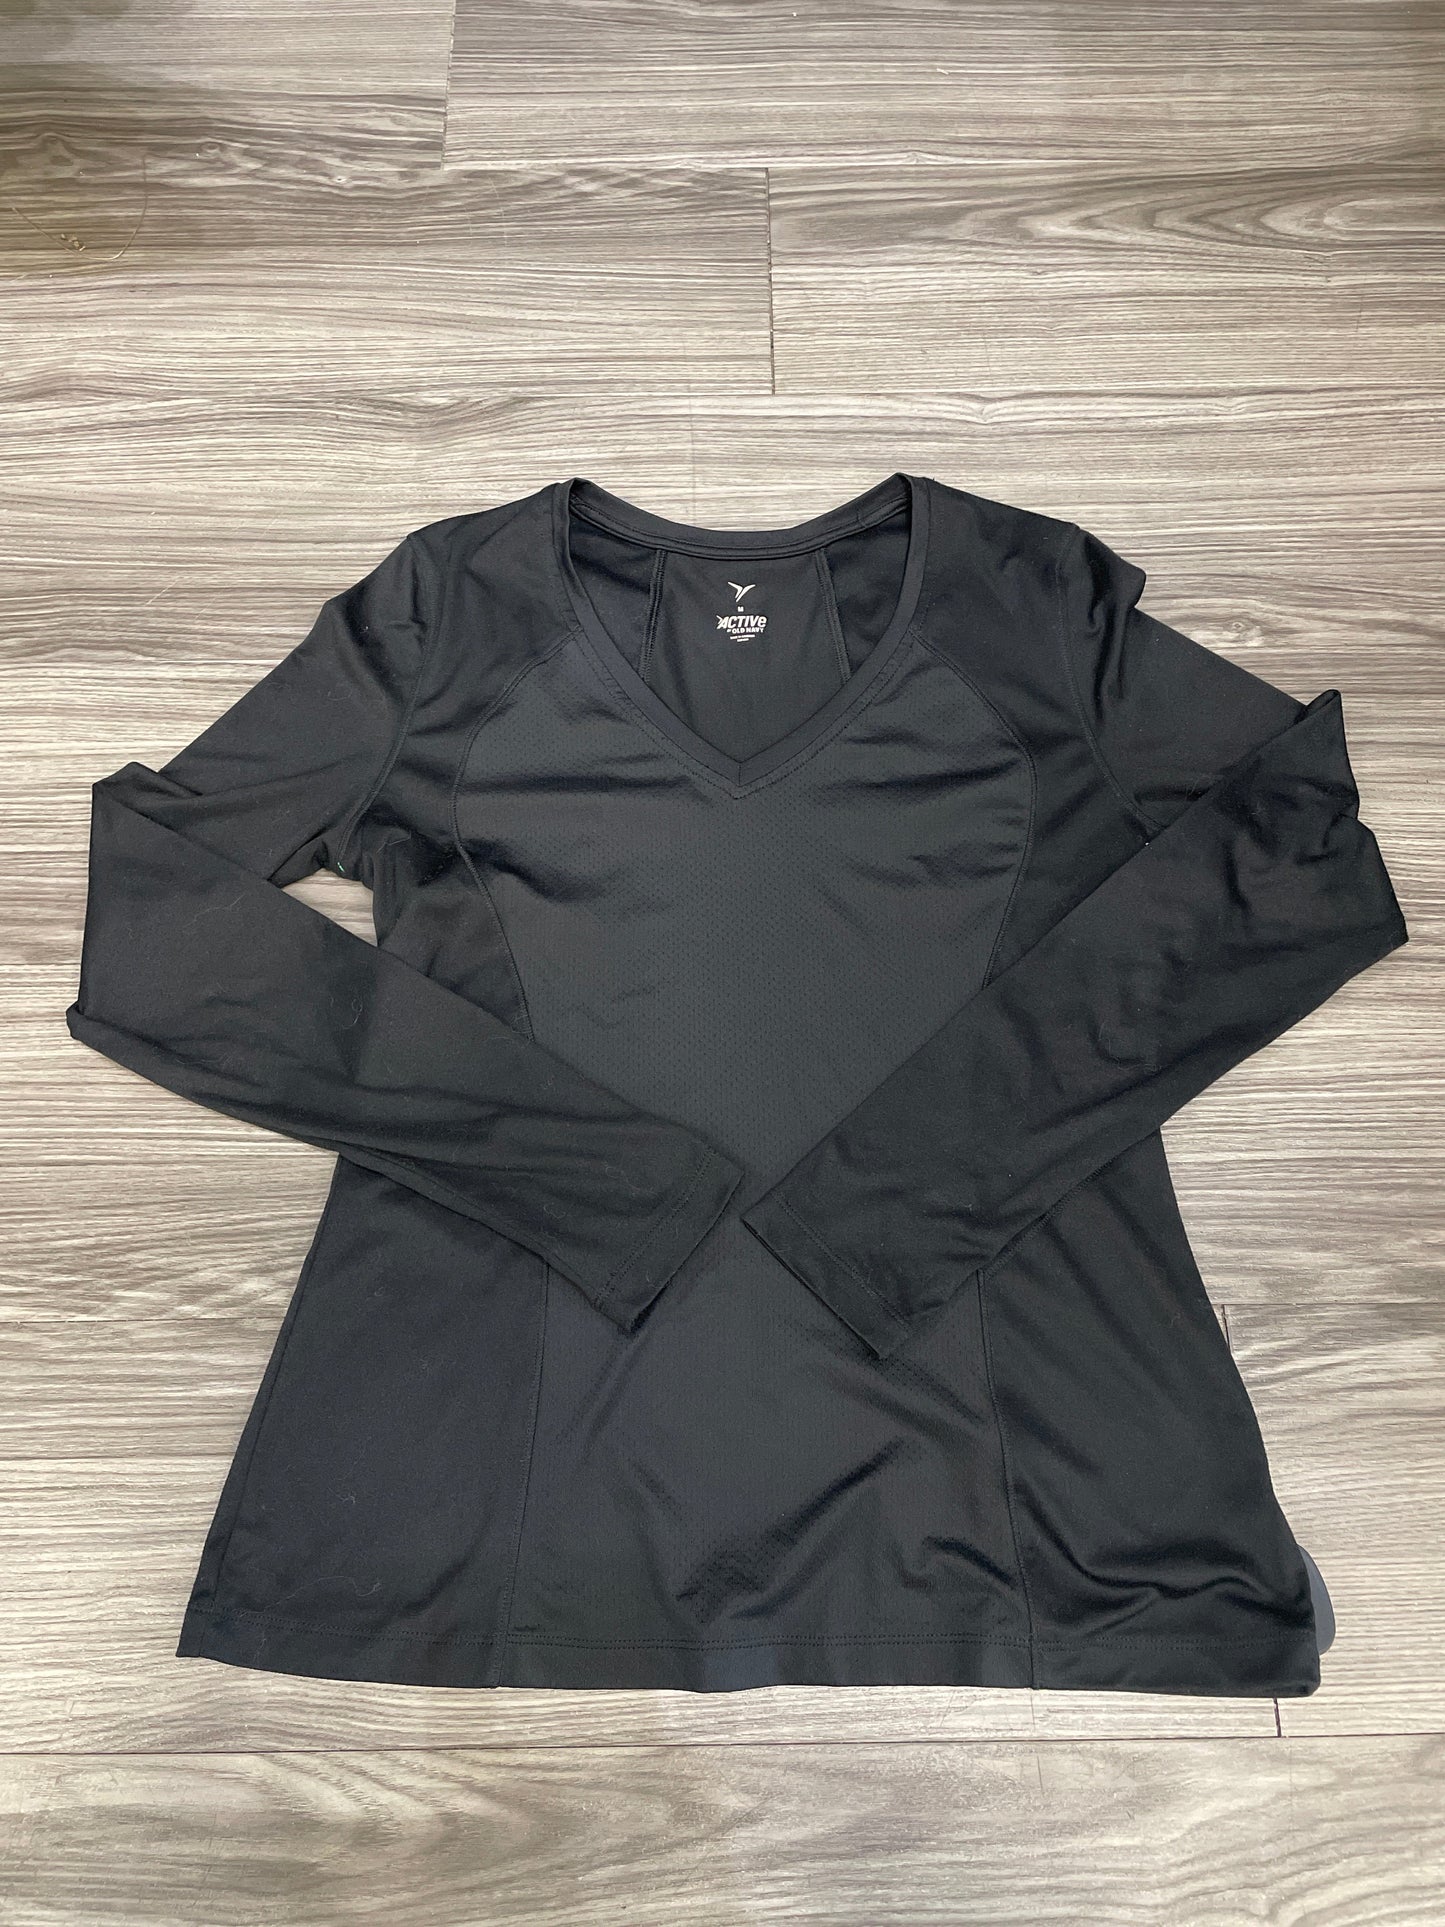 Athletic Top Long Sleeve Crewneck By Old Navy  Size: M